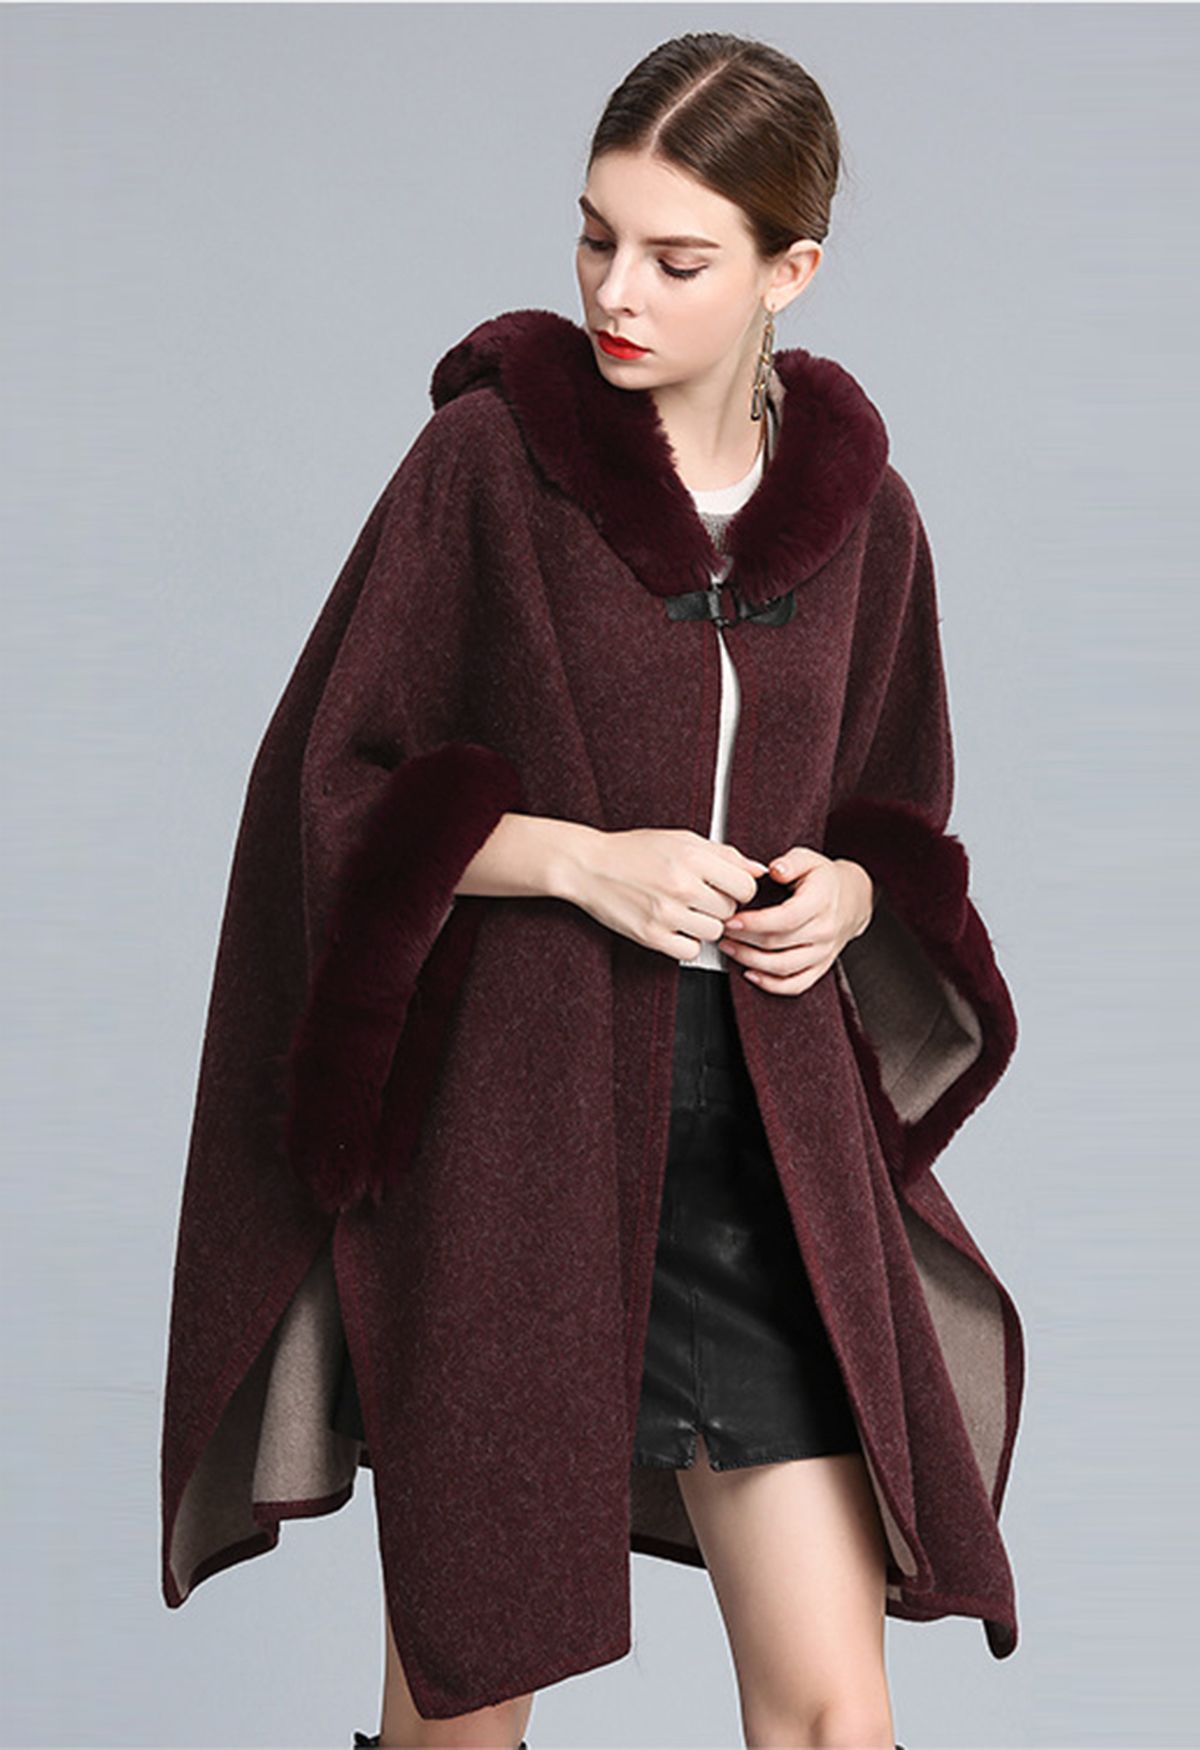 Cozy Faux Fur Hooded Poncho in Burgundy - Retro, Indie and Unique Fashion